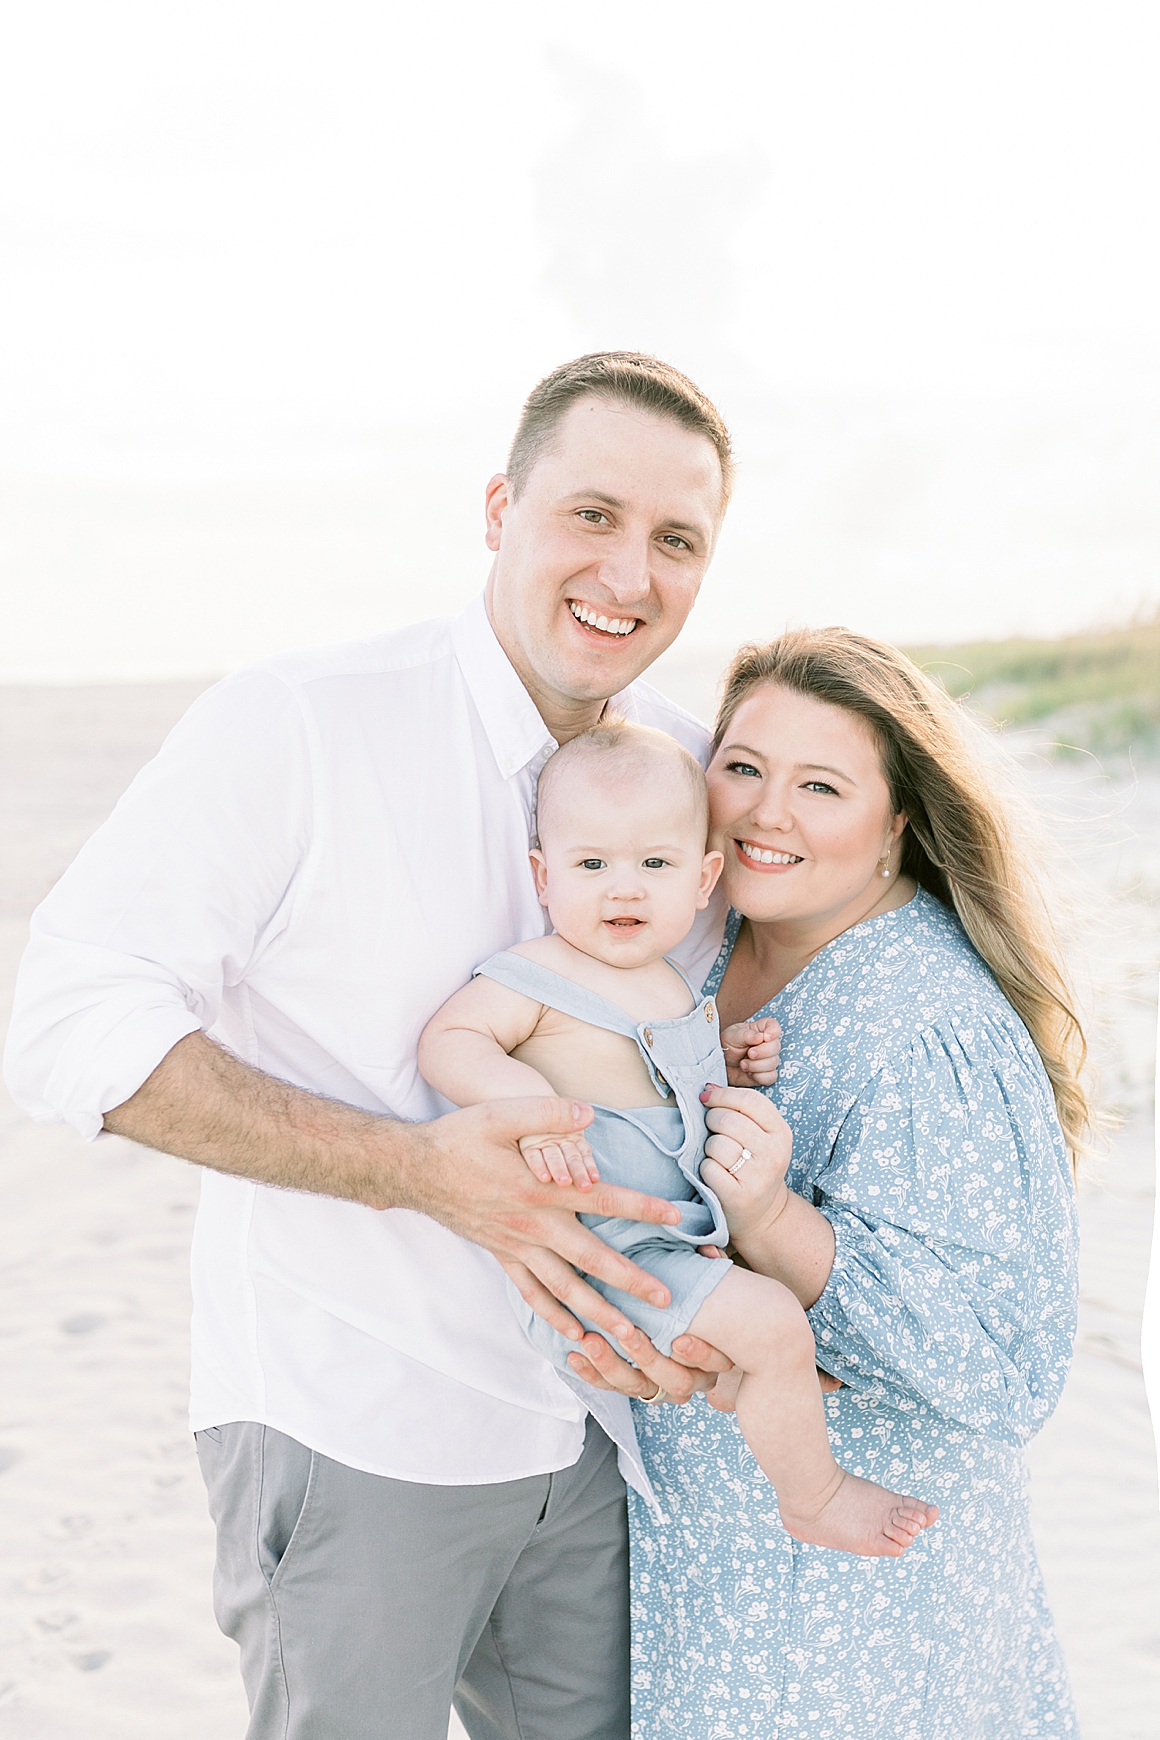 Mom and Dad take photos with their son on the beach for his first birthday. Photos by Caitlyn Motycka Photography.